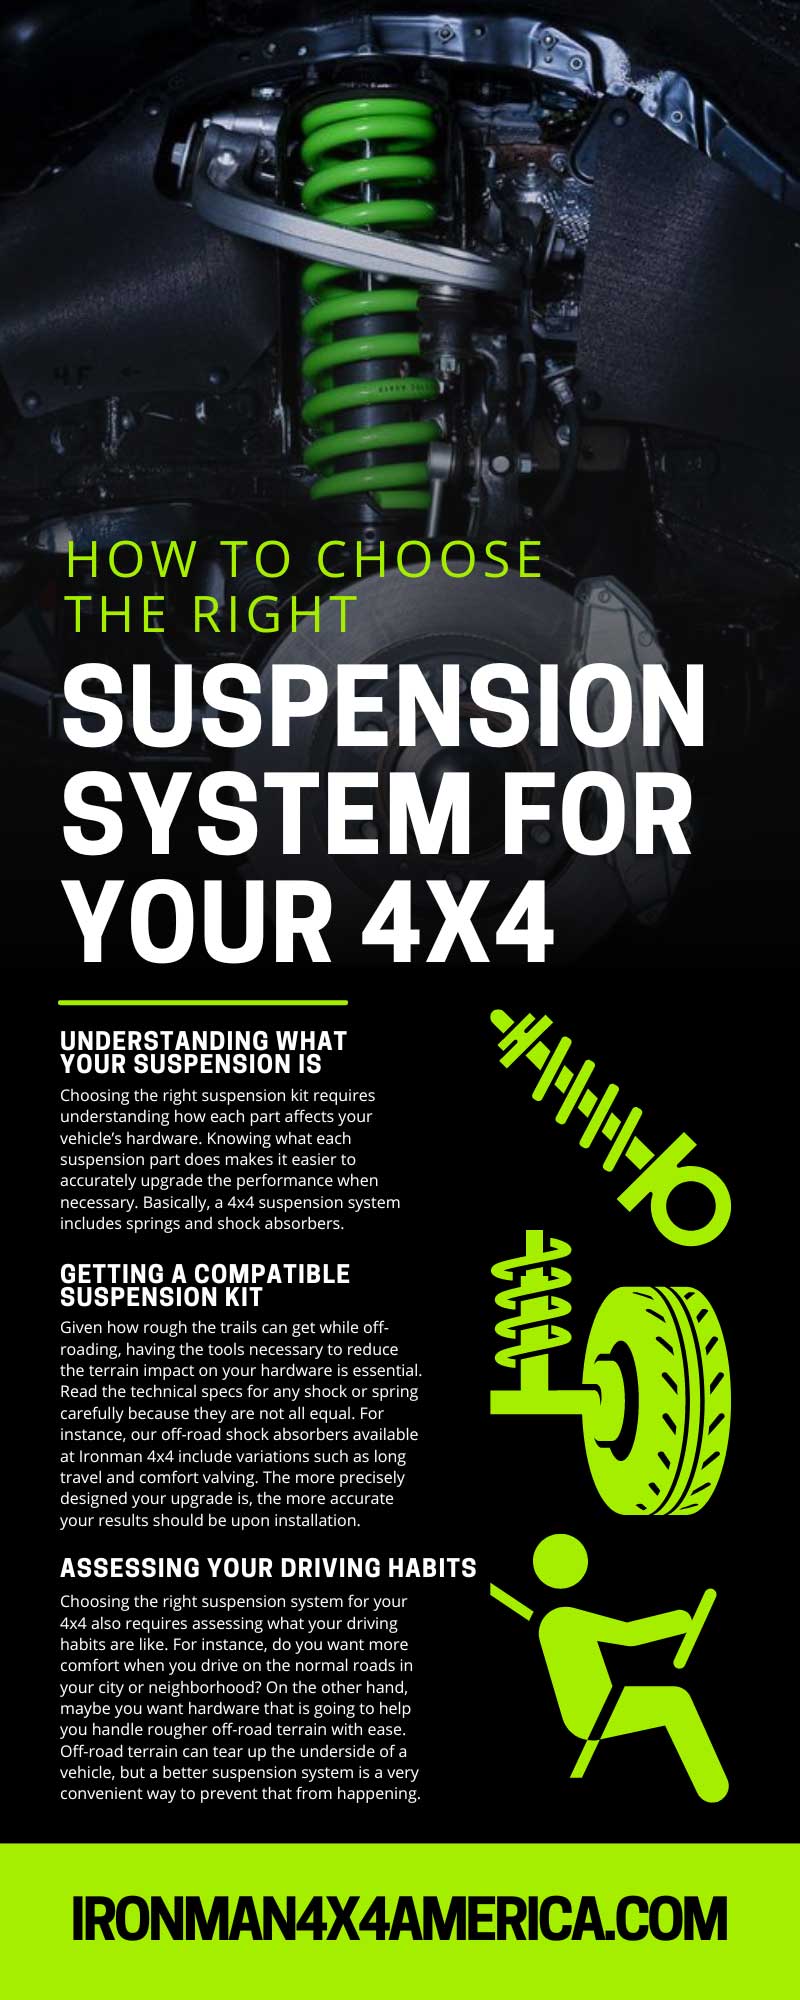 How To Choose the Right Suspension System for Your 4x4